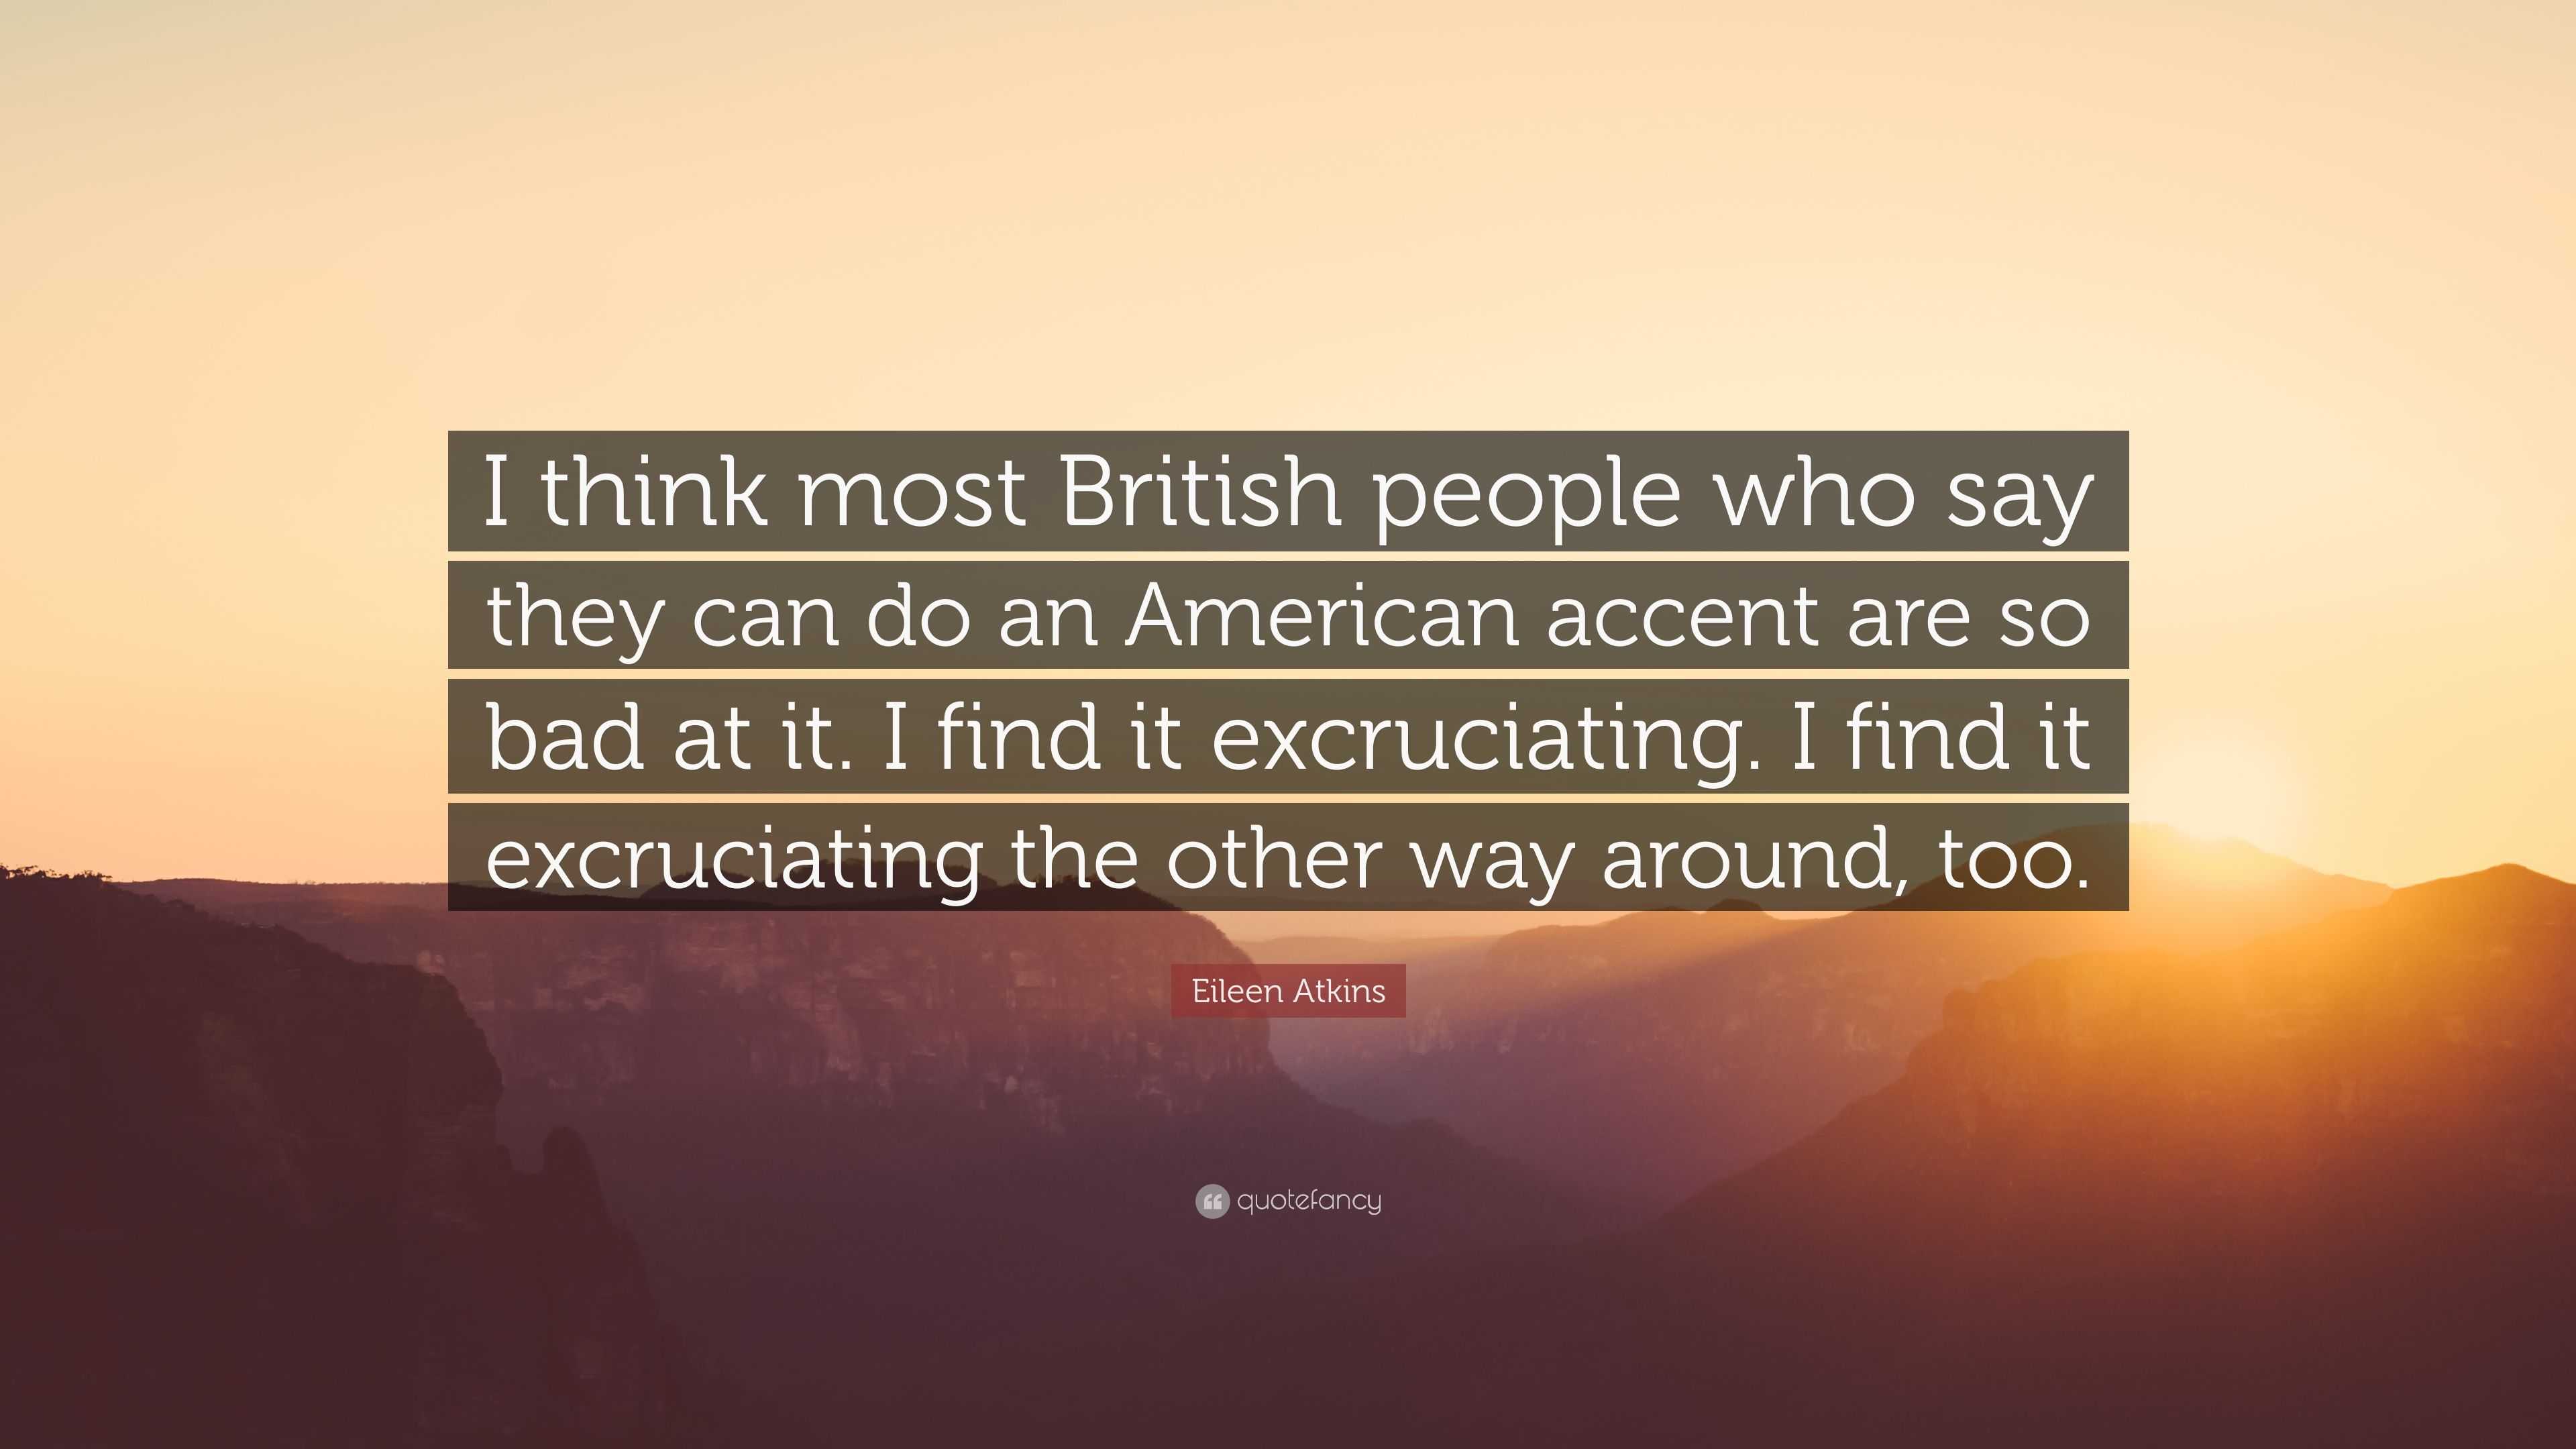 https://quotefancy.com/media/wallpaper/3840x2160/3280063-Eileen-Atkins-Quote-I-think-most-British-people-who-say-they-can.jpg